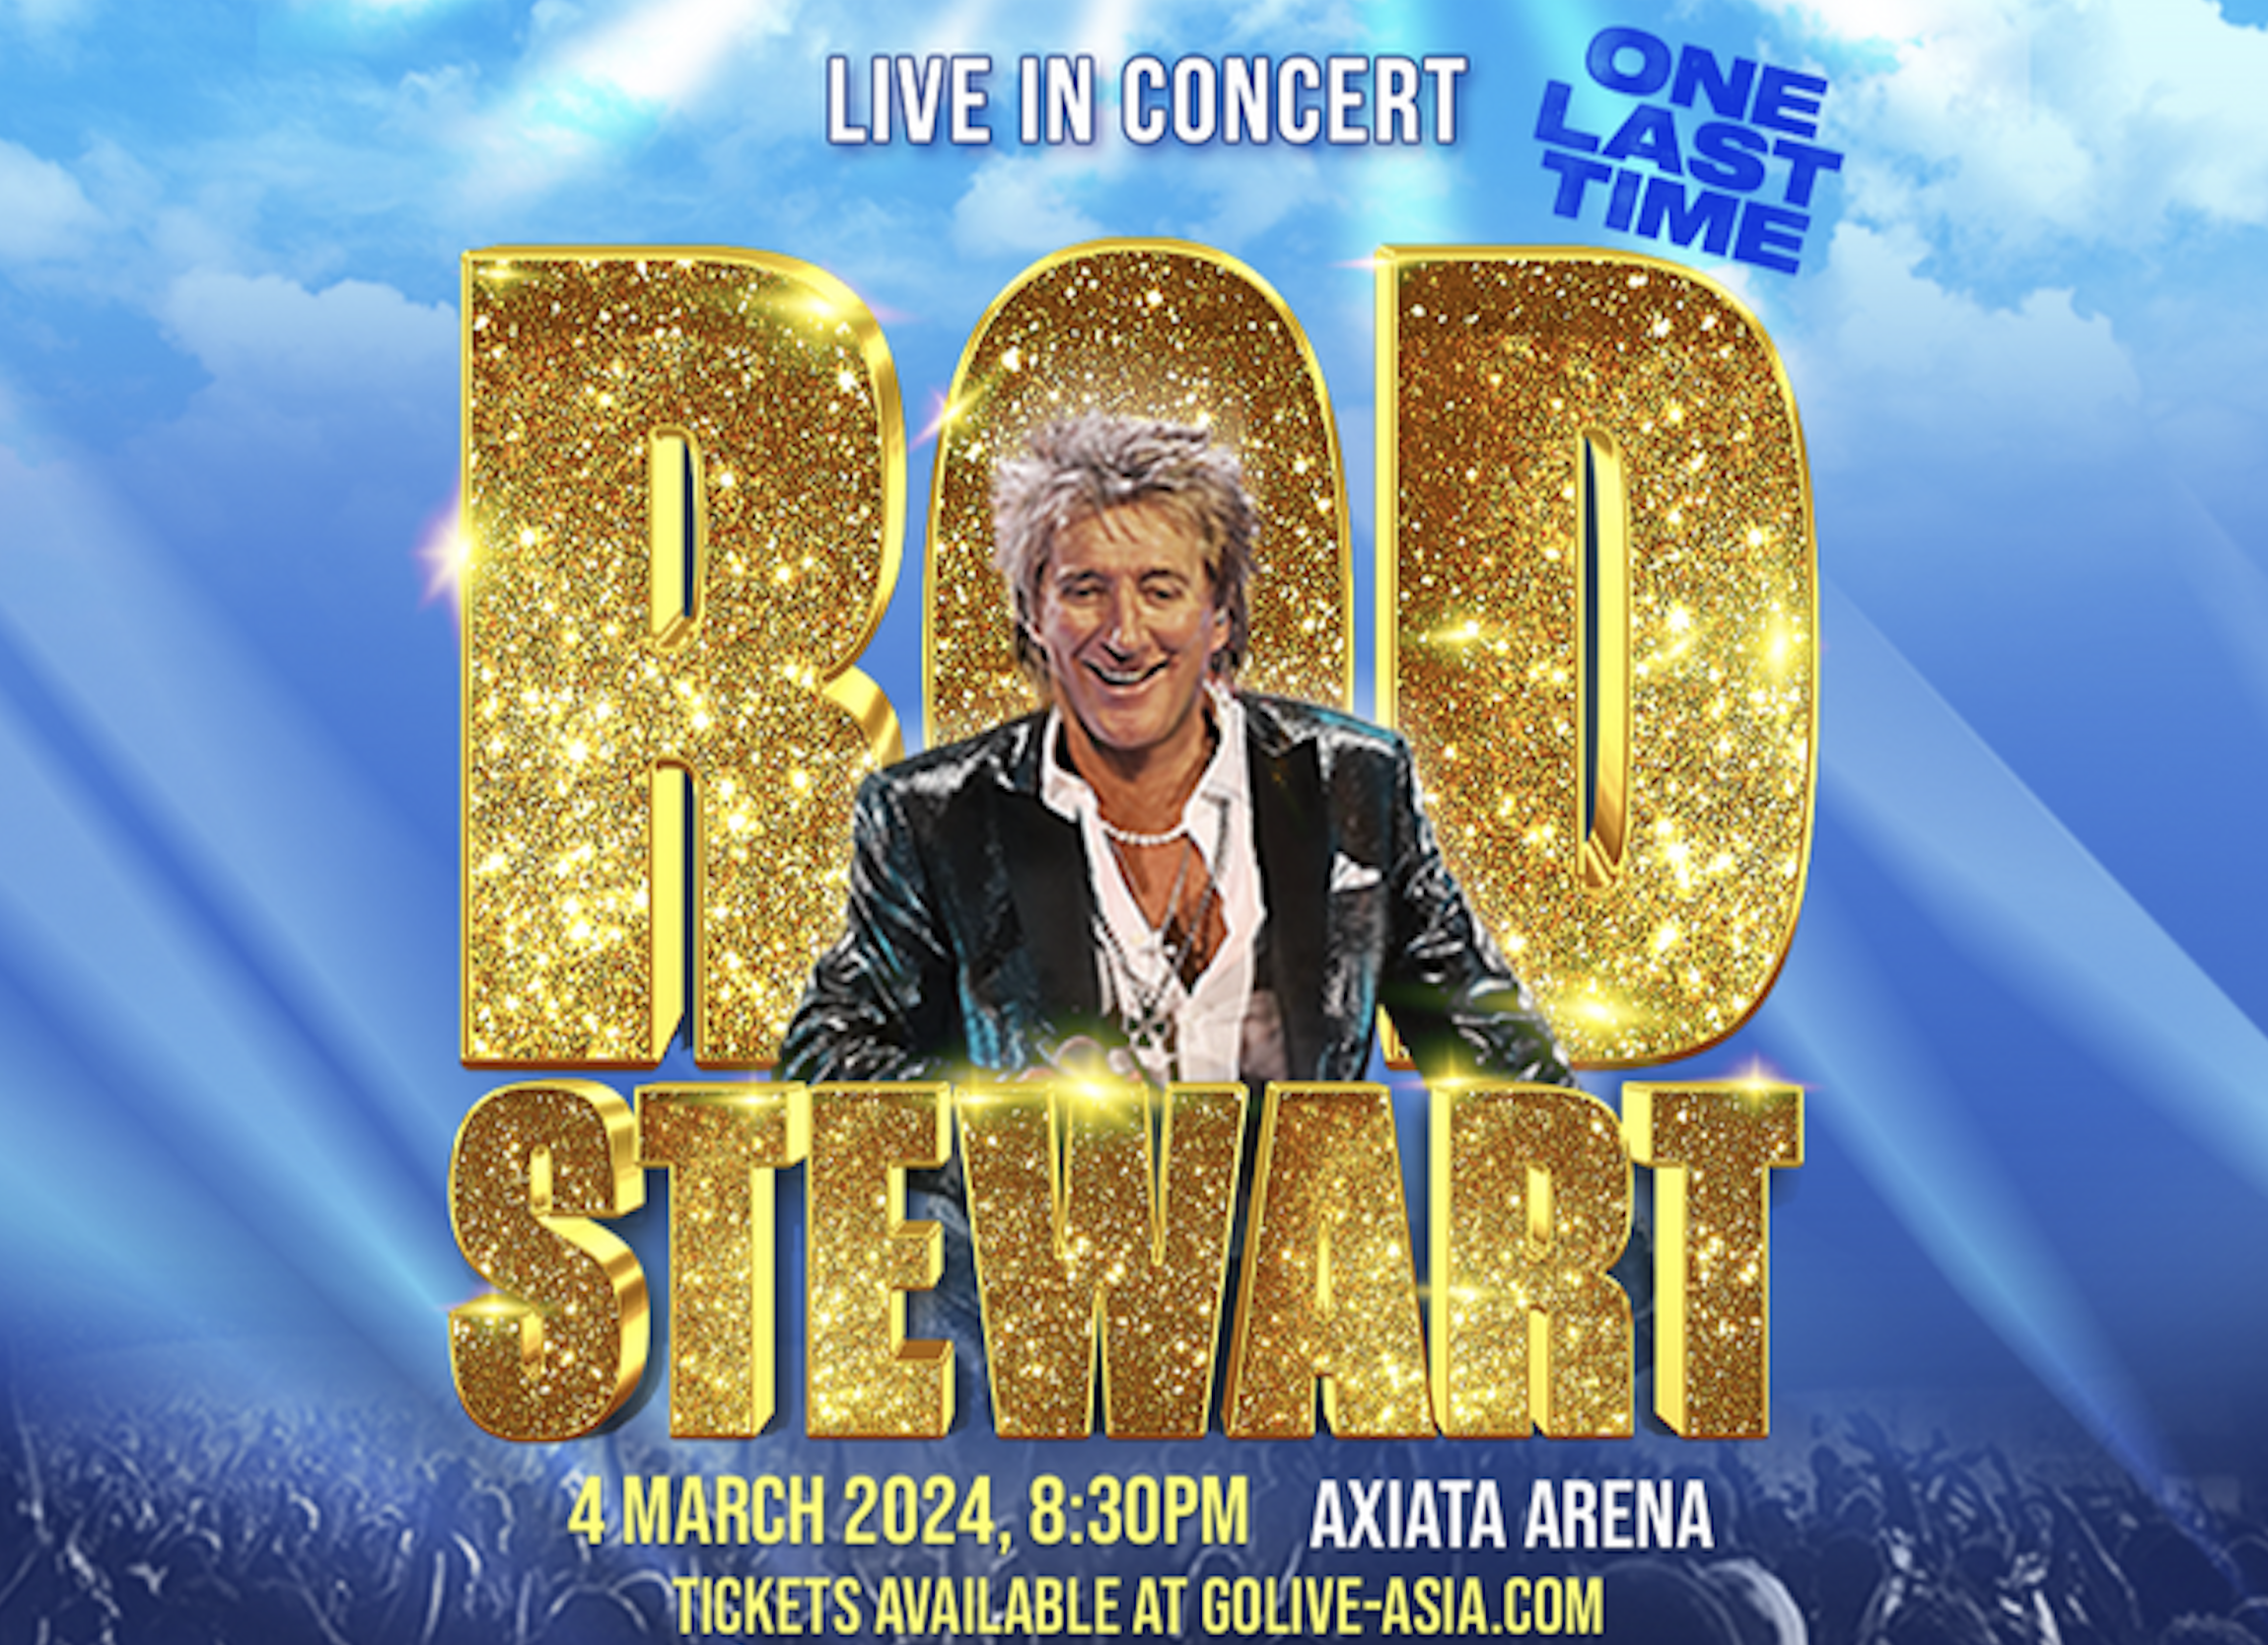 Rod Stewart abruptly cancels March 4 show at Axiata Arena